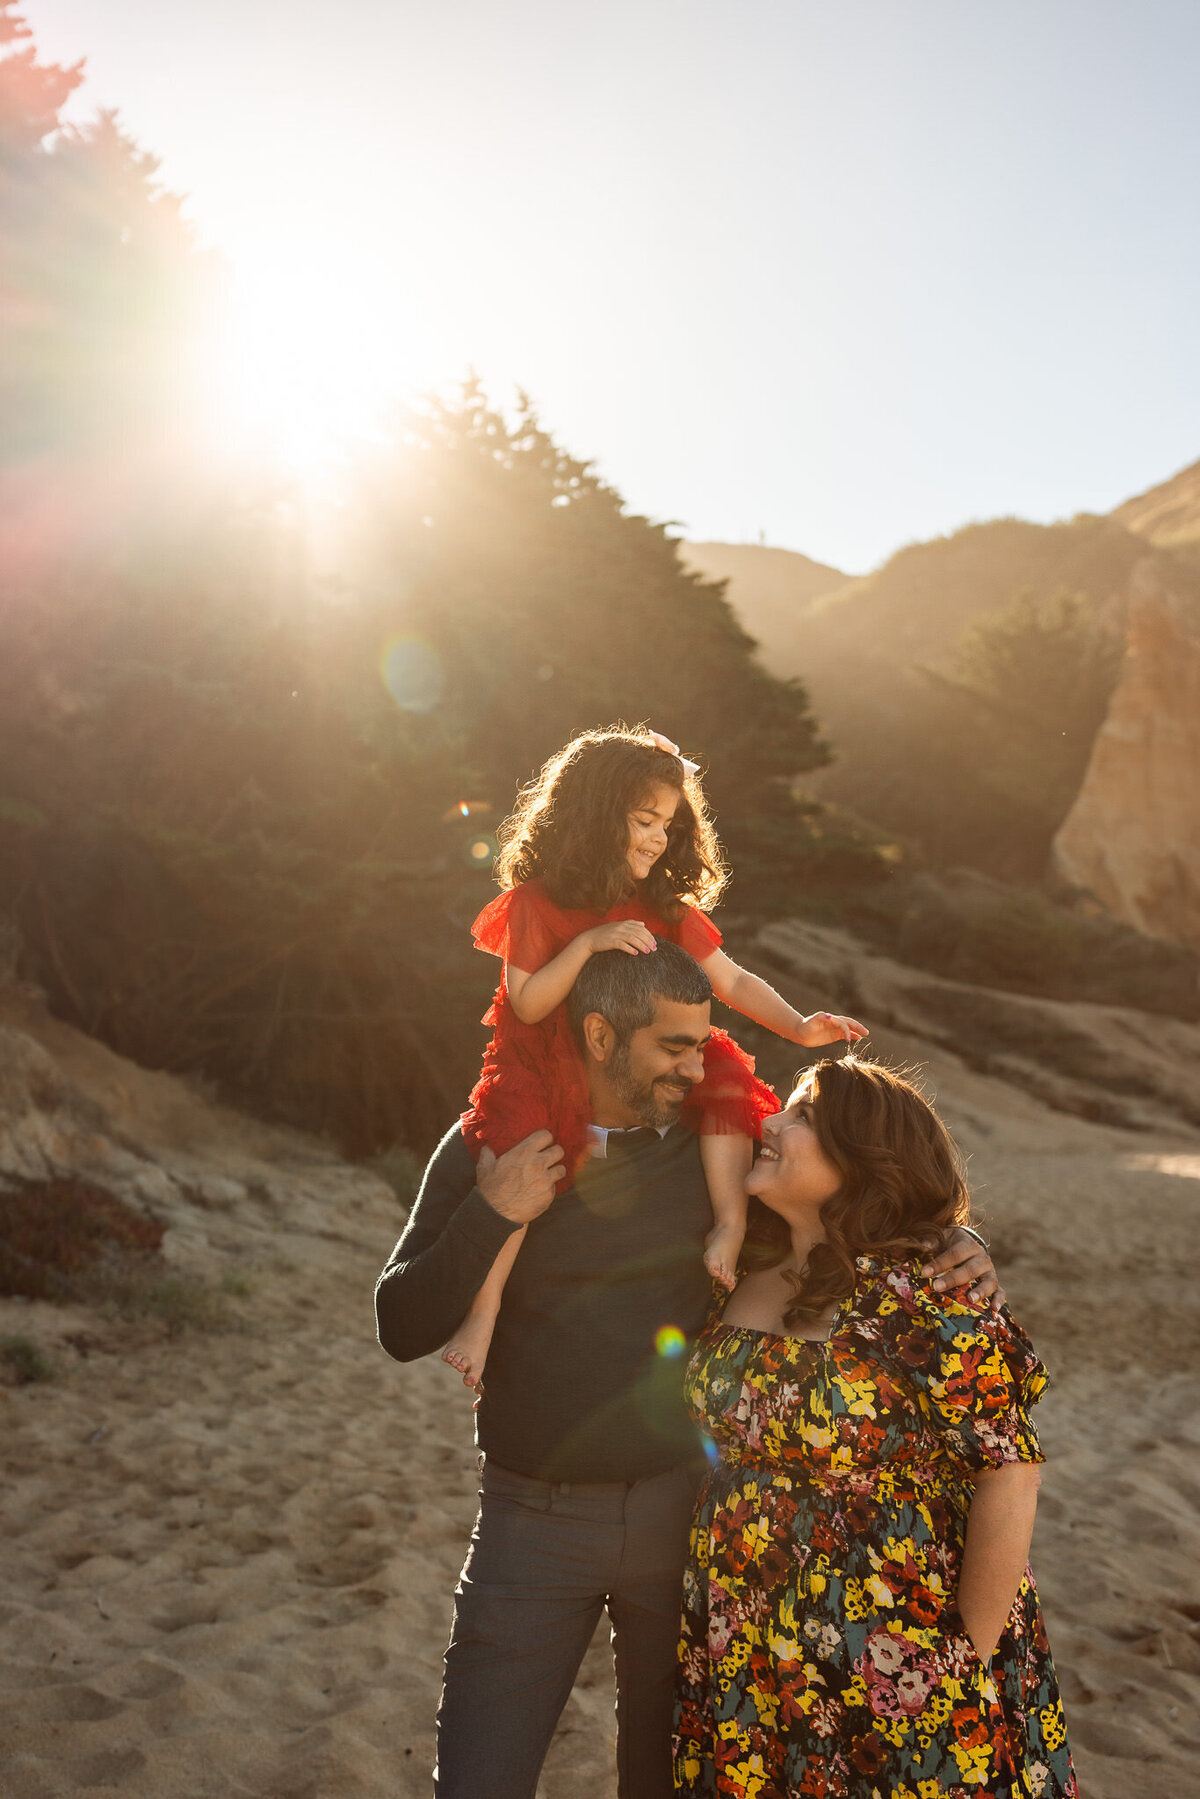 Family portrait on beach with girl on dad's shoulders and reaching for mom's head.  Warm sunlight in the background